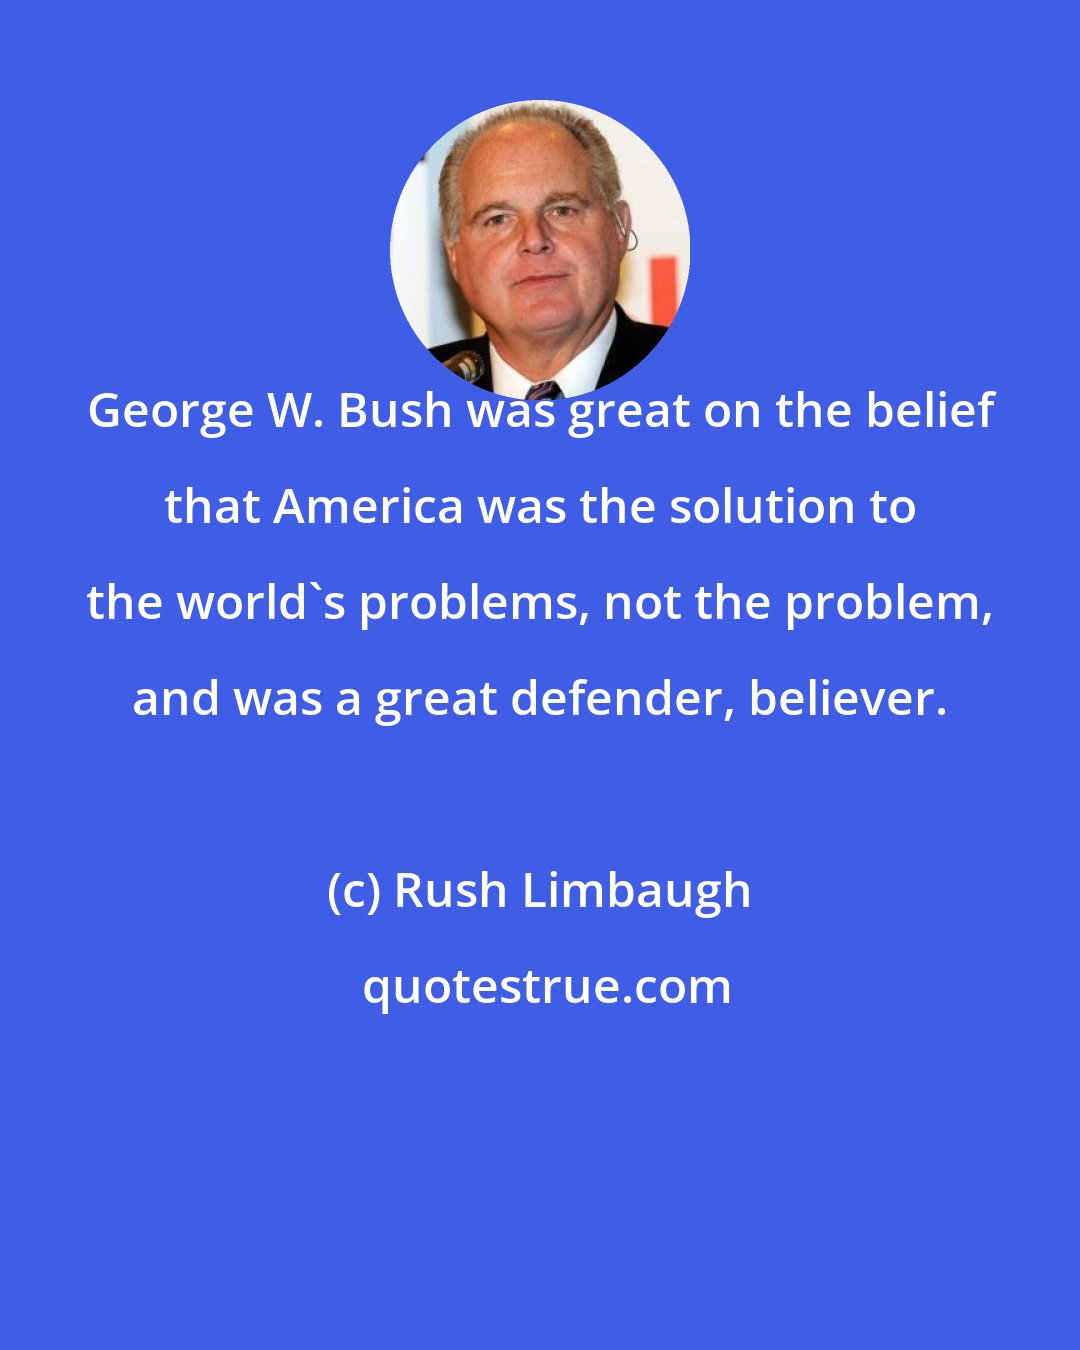 Rush Limbaugh: George W. Bush was great on the belief that America was the solution to the world's problems, not the problem, and was a great defender, believer.